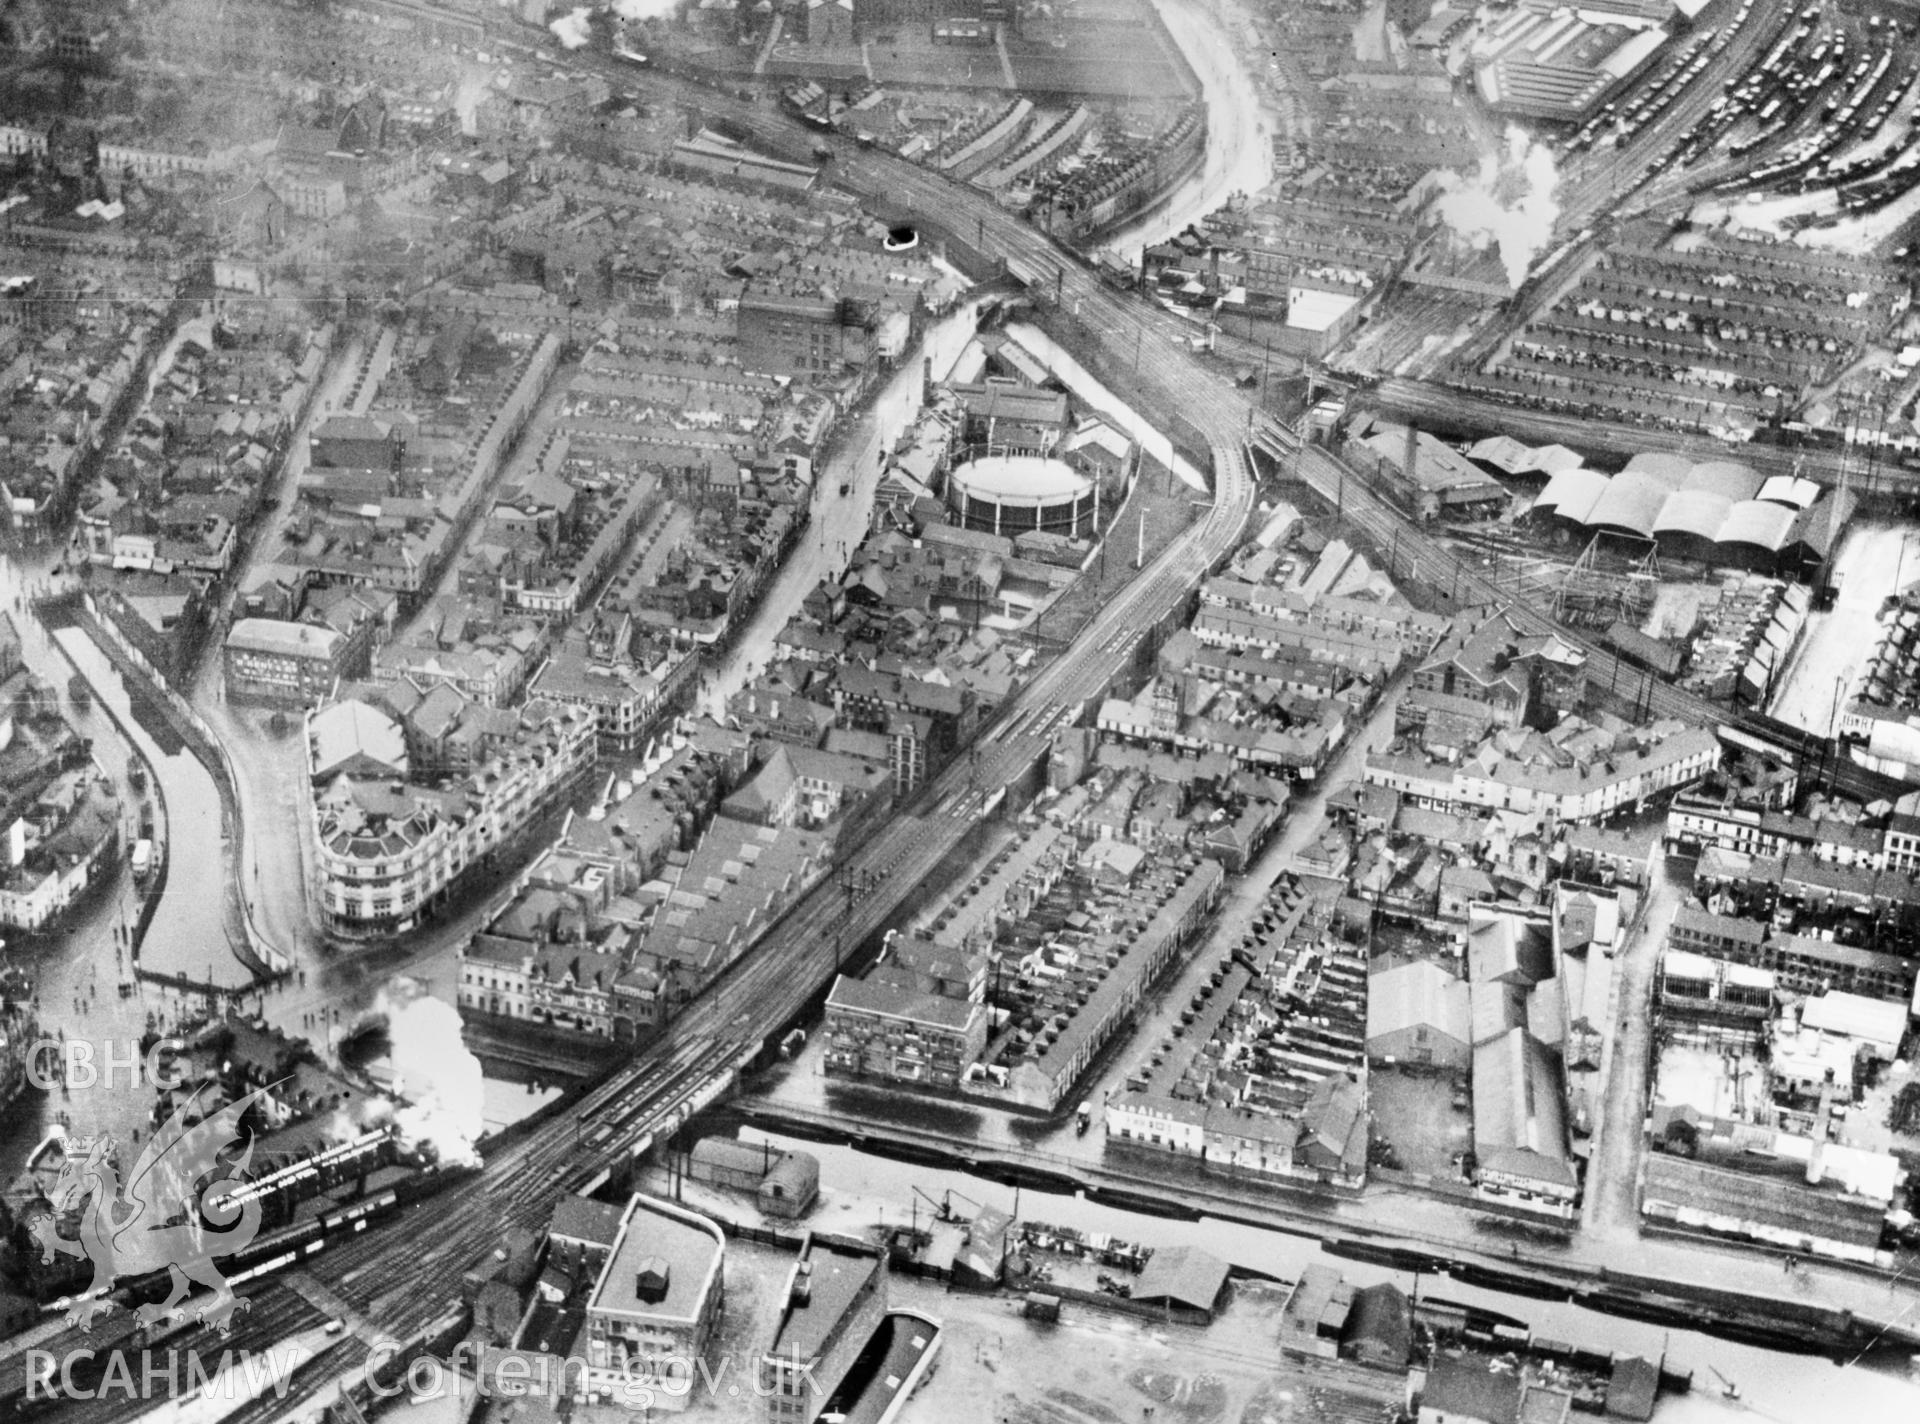 View of Cardiff showing the Great Western Railway through Temperance Town and the Glamorganshire Canal. Oblique aerial photograph, 5?x4? BW glass plate.